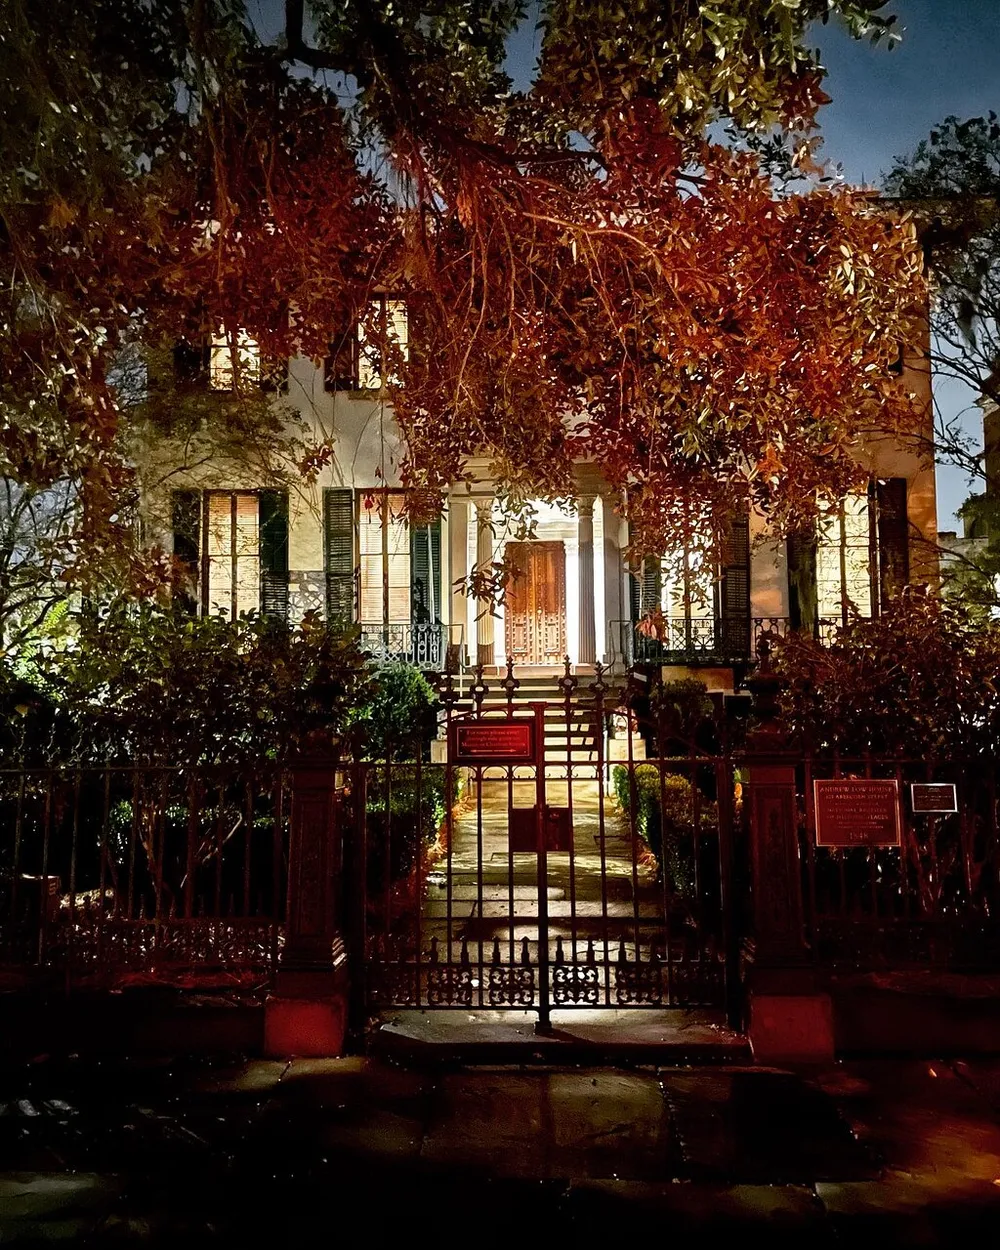 A warmly lit stately house peeks through dense foliage behind an ornate iron gate in the evening